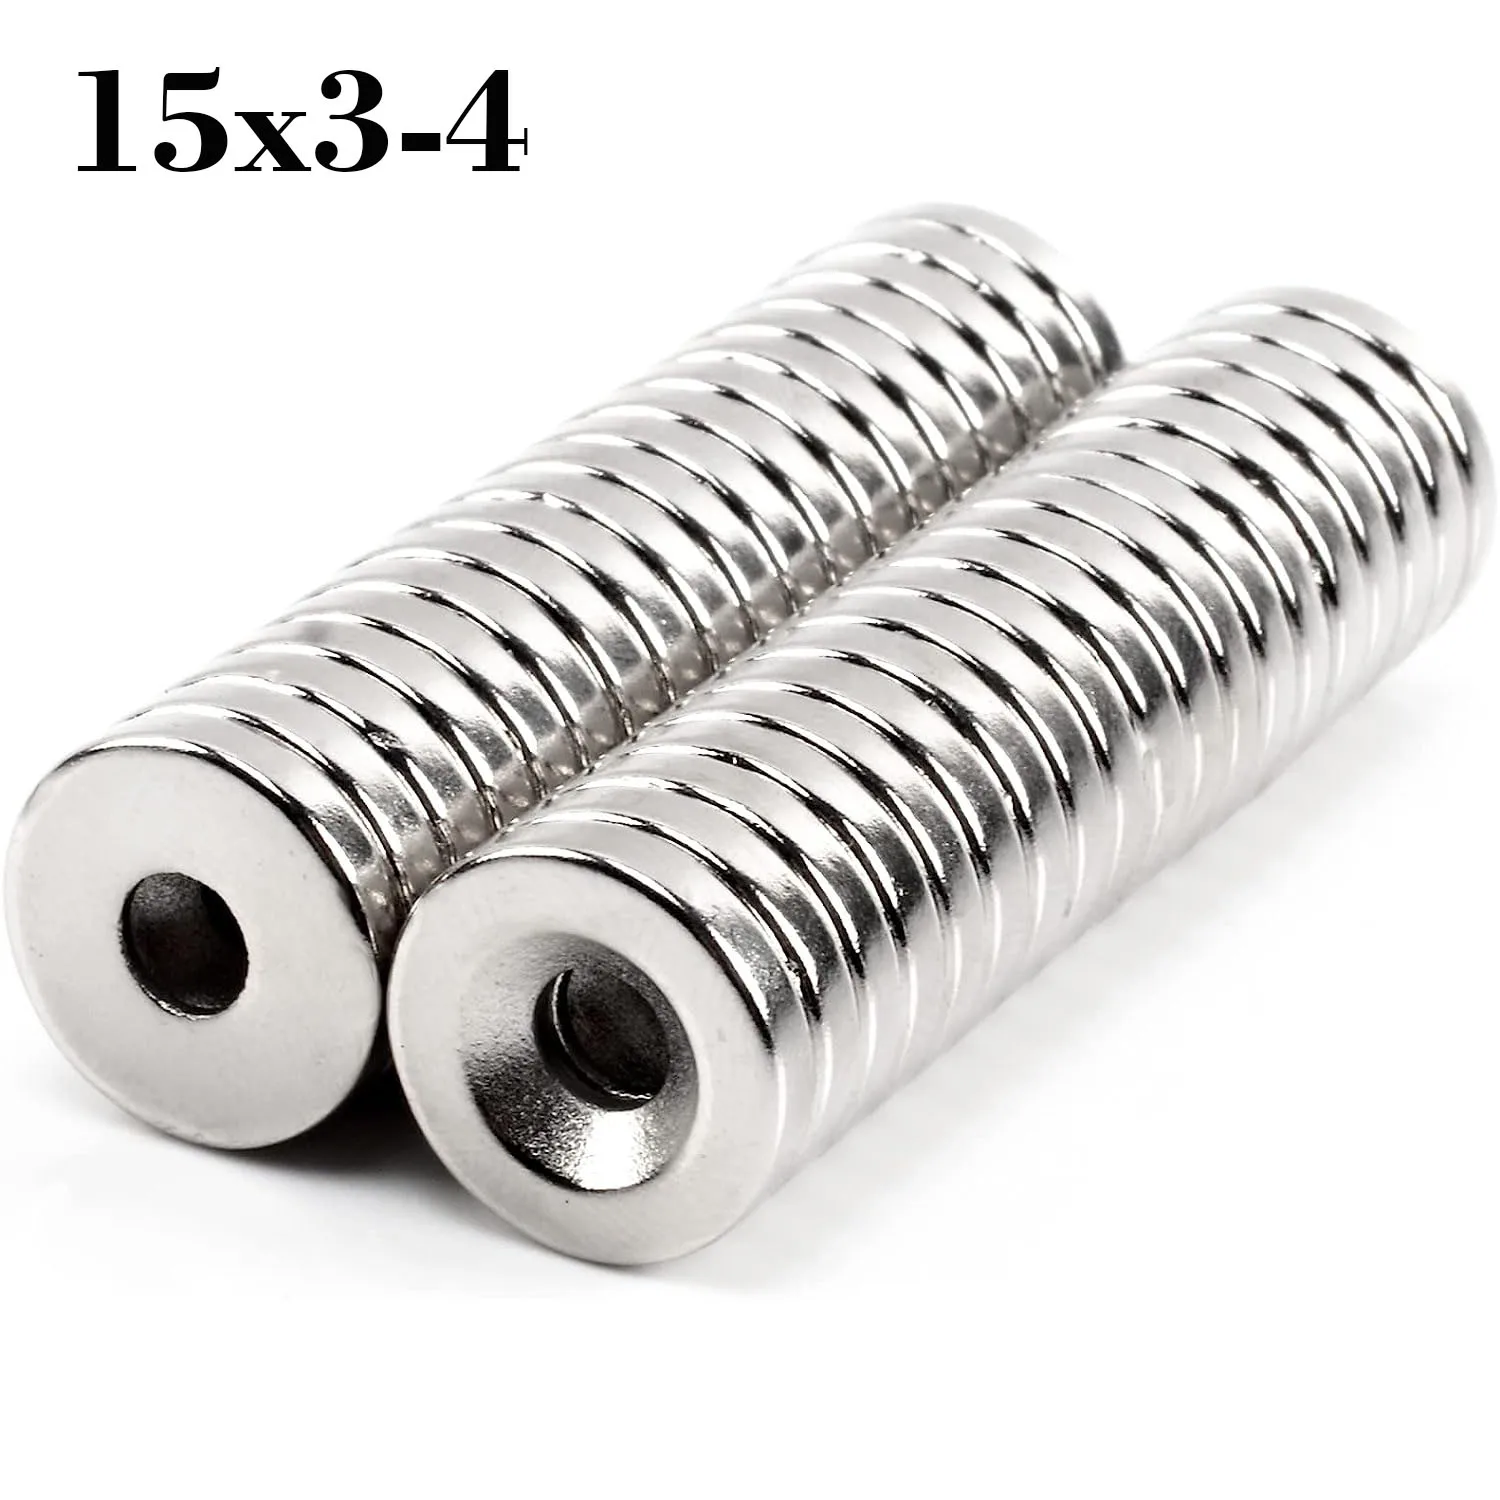 

4~100Pcs 15x3 Hole 4mm Strong Magnets Round Countersunk Neodymium Magnet N35 NdFeB Powerful Rare Earth Permanent Magnetic Imanes